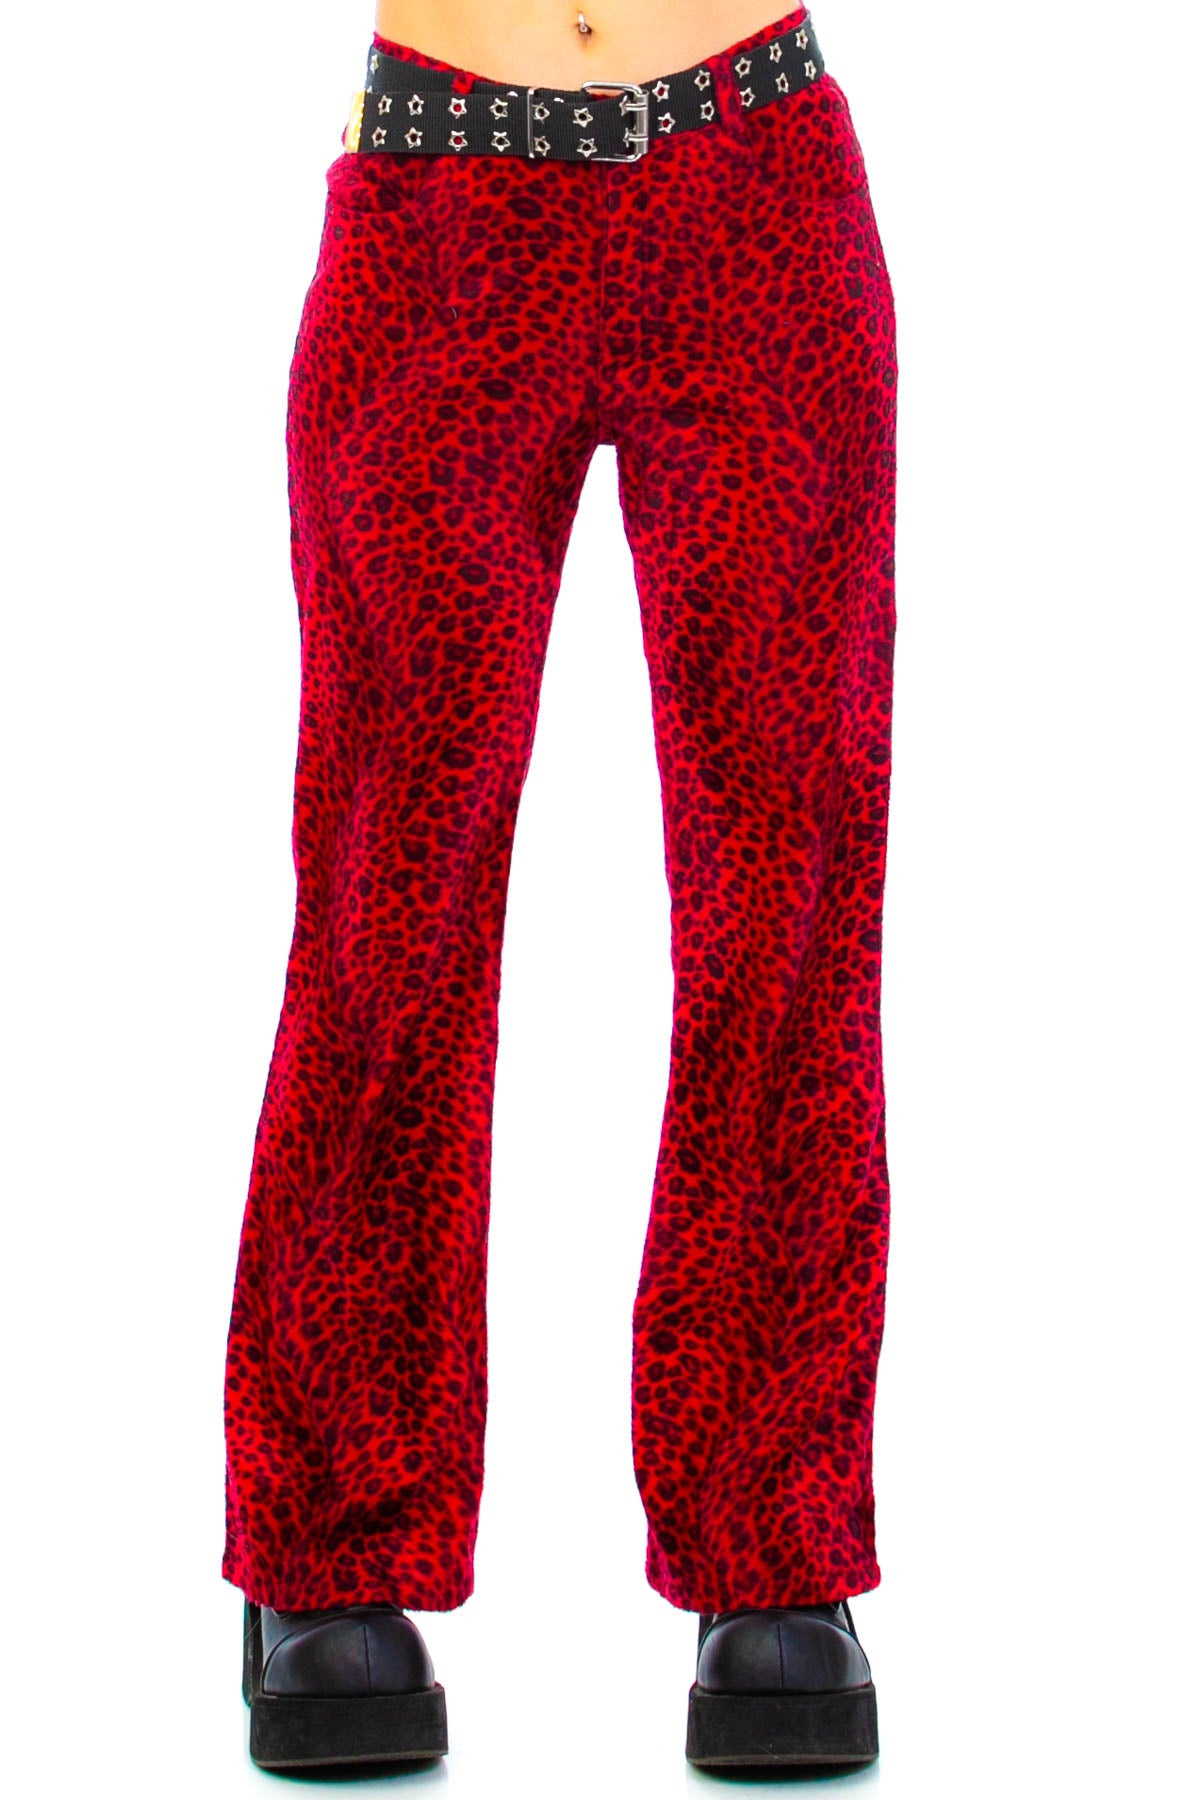 Red trousers and Leopard heels ⋆ chic everywhere